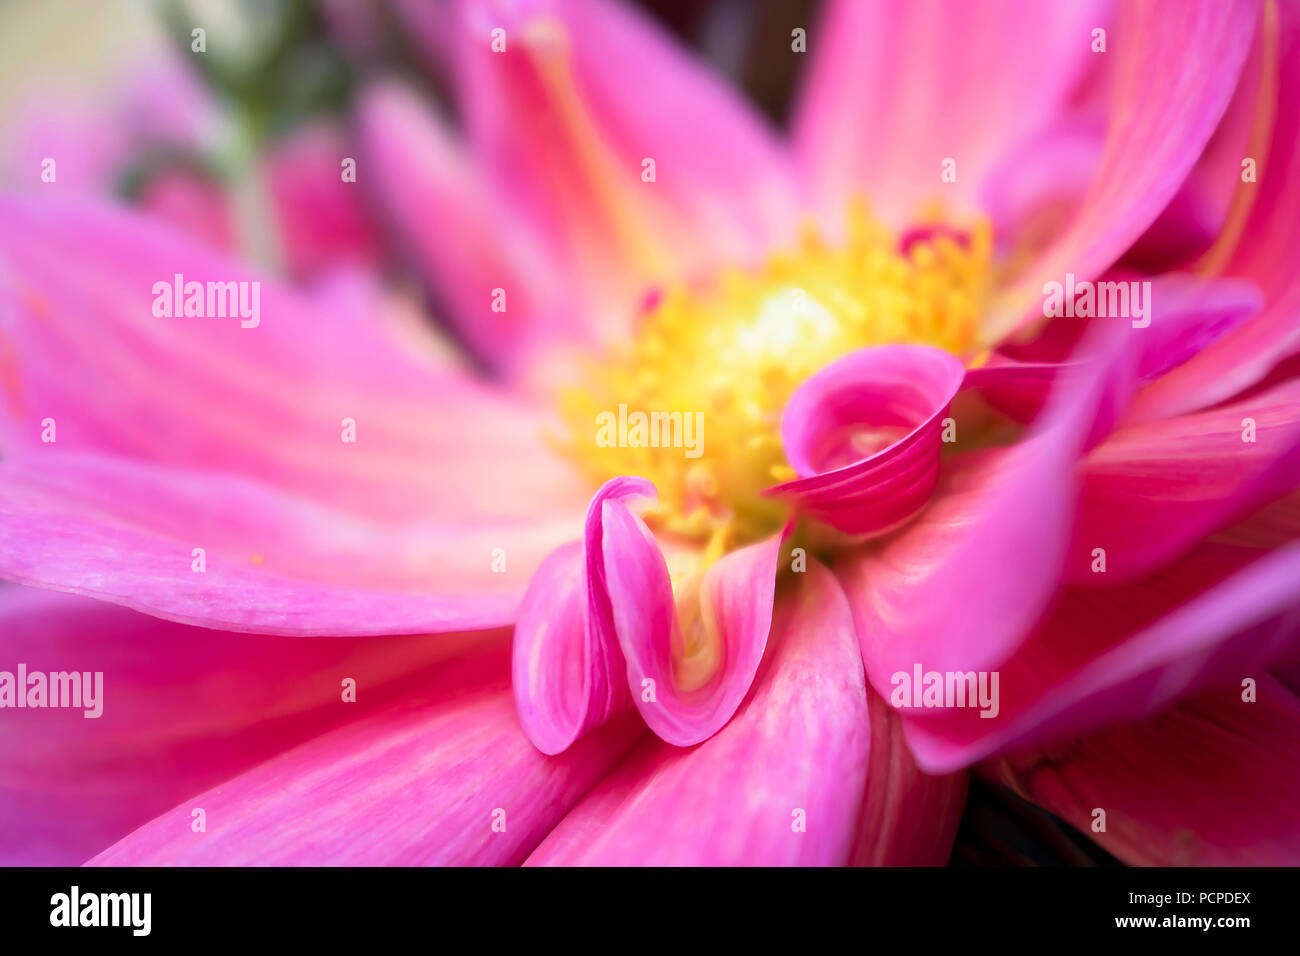 Close Up Pink Dahlia Flower Petals in Delicate Curve Stock Photo